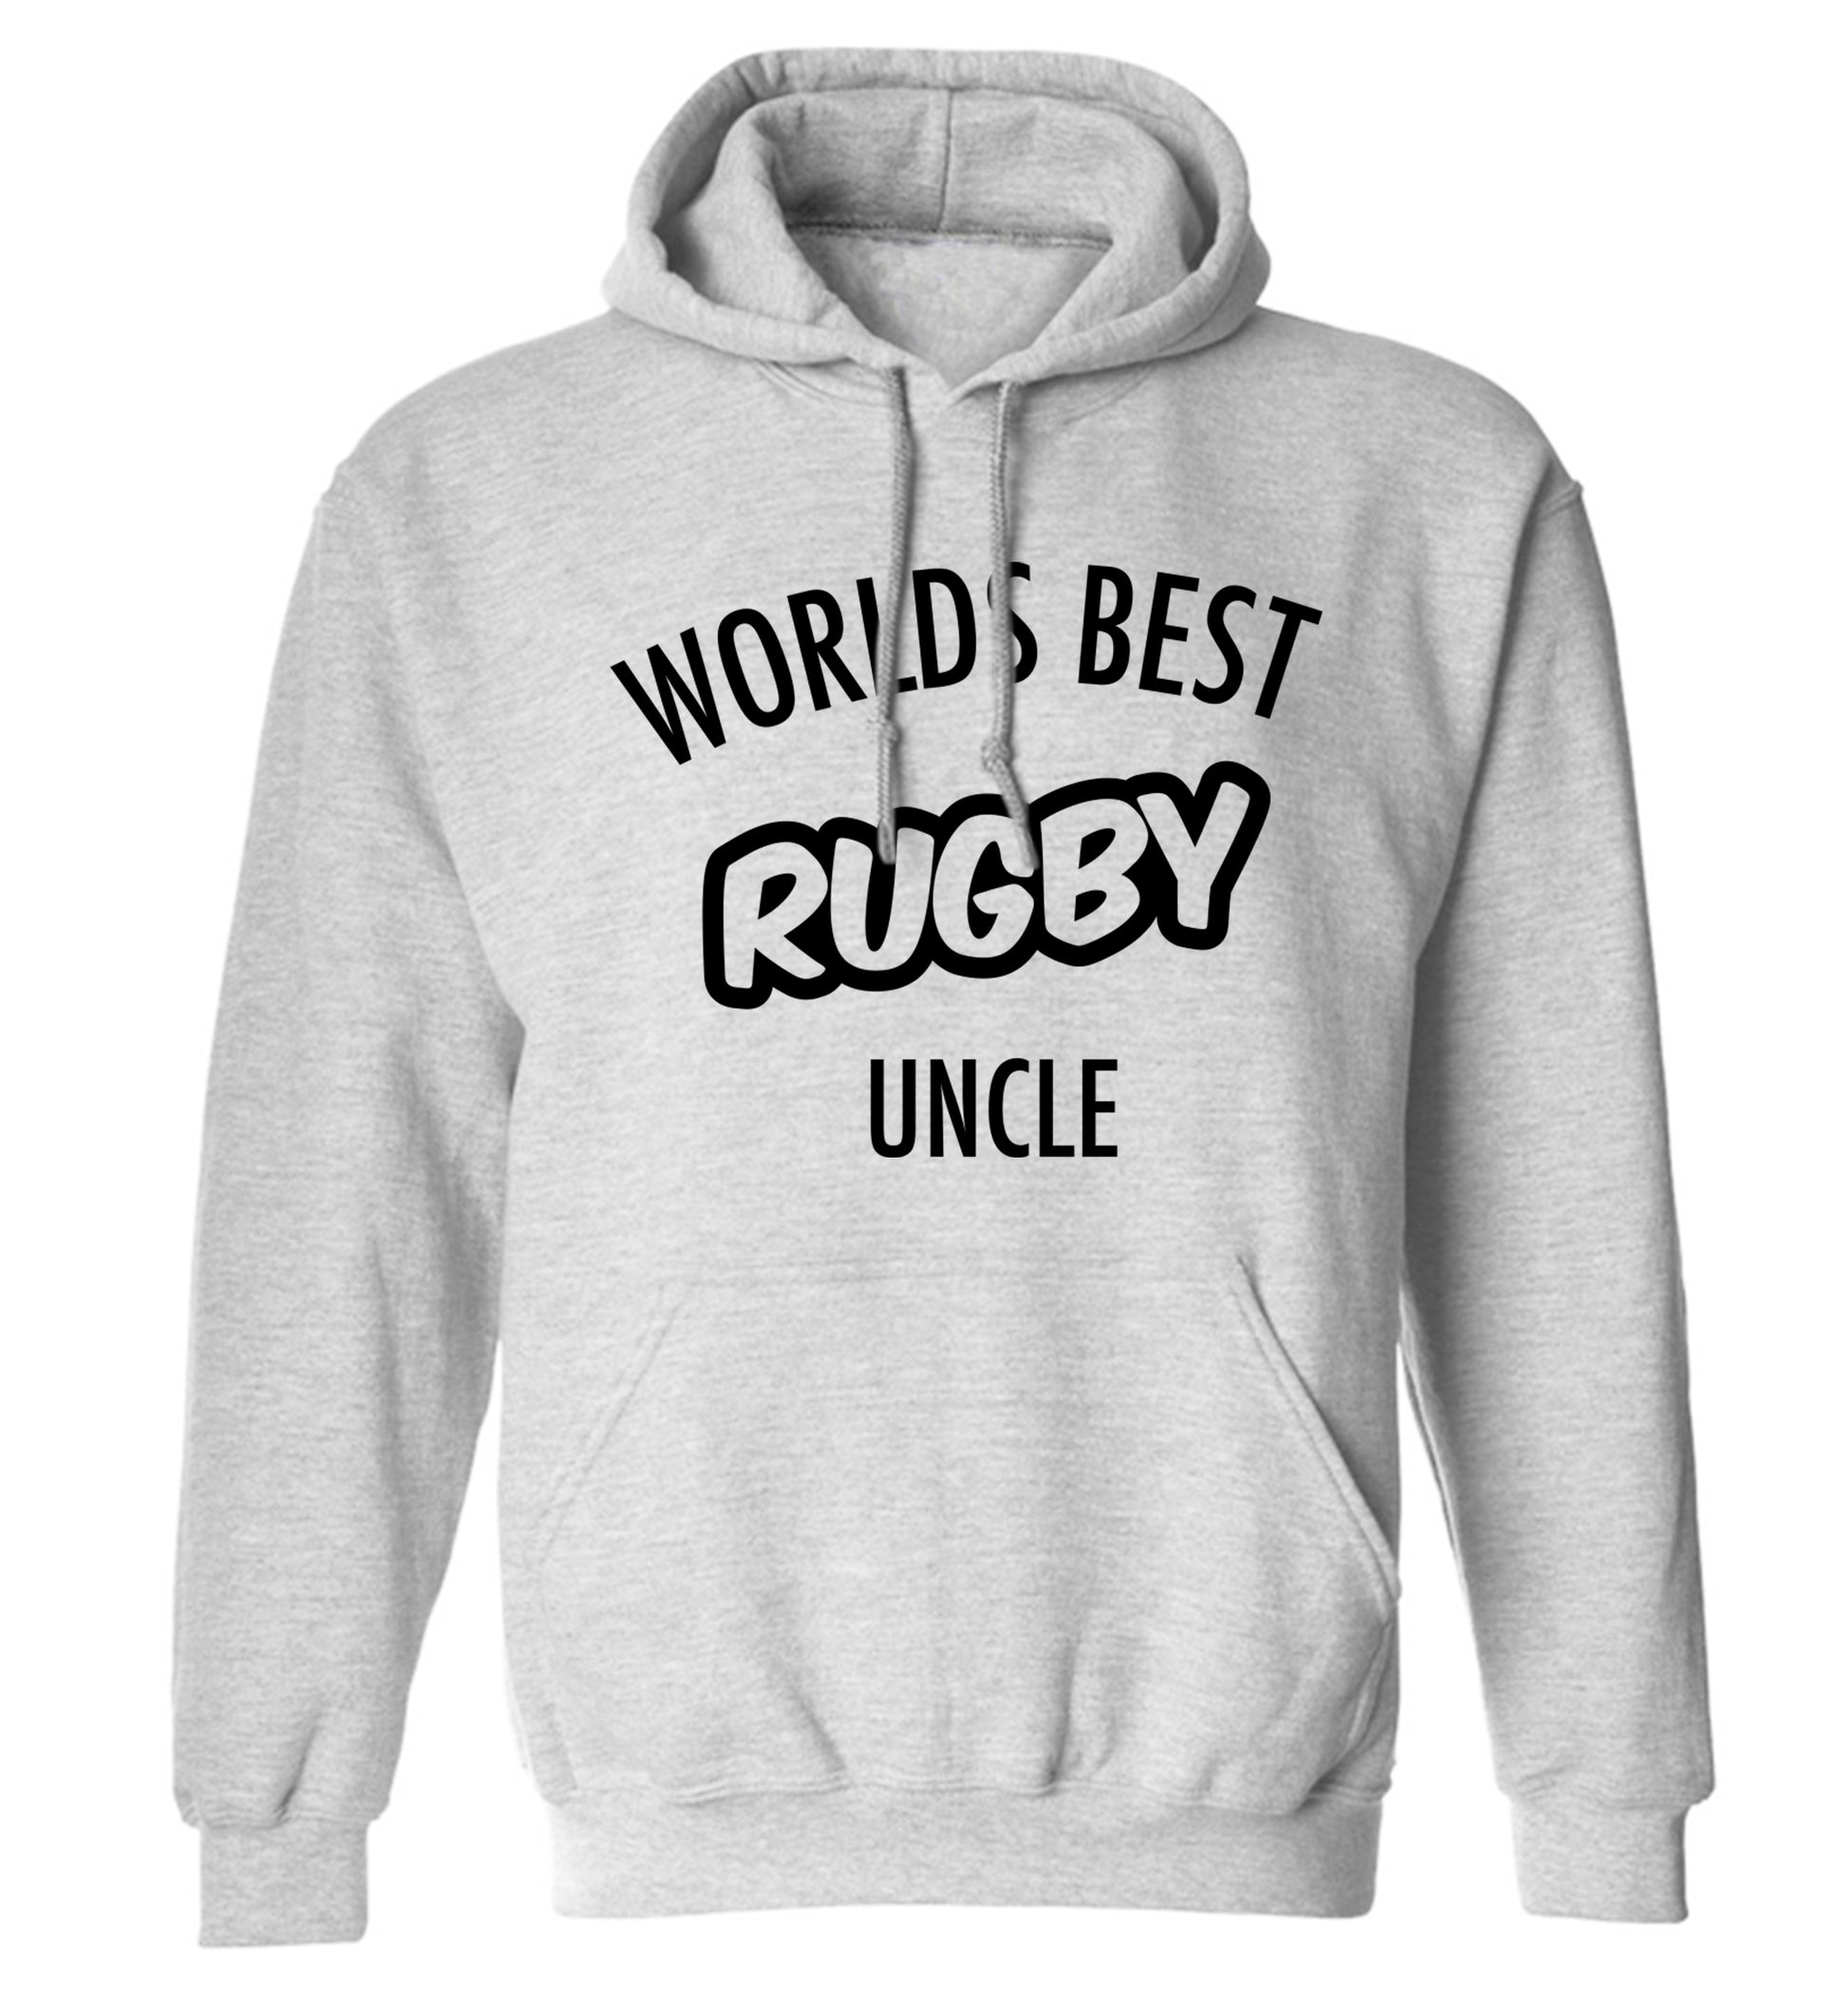 Worlds best rugby uncle adults unisex grey hoodie 2XL